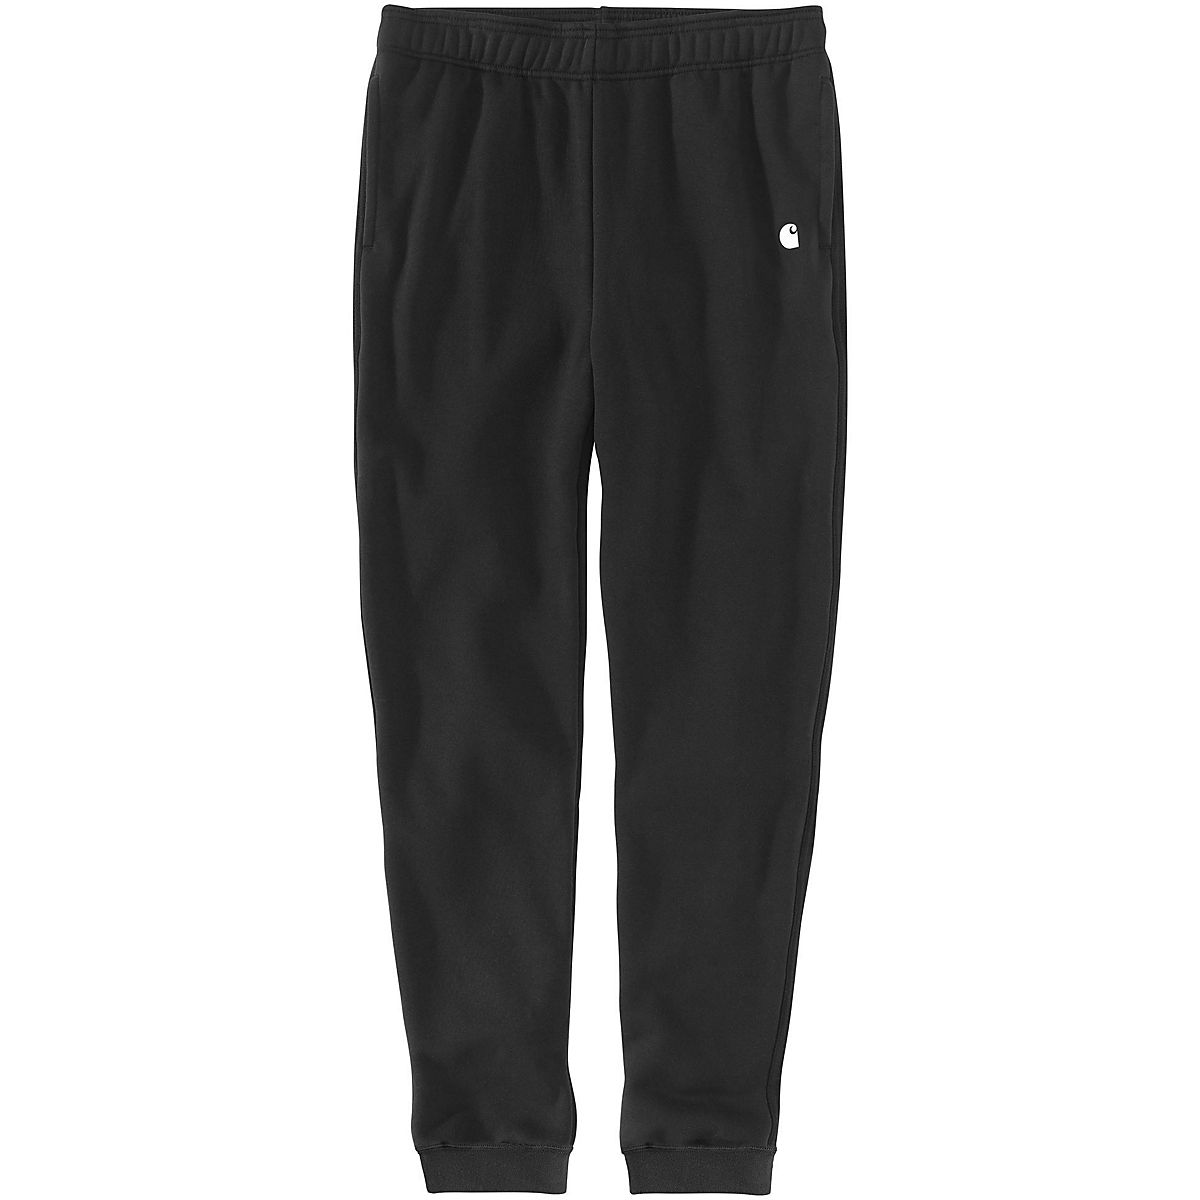 Carhartt Men's Tapered Sweatpants | Free Shipping at Academy